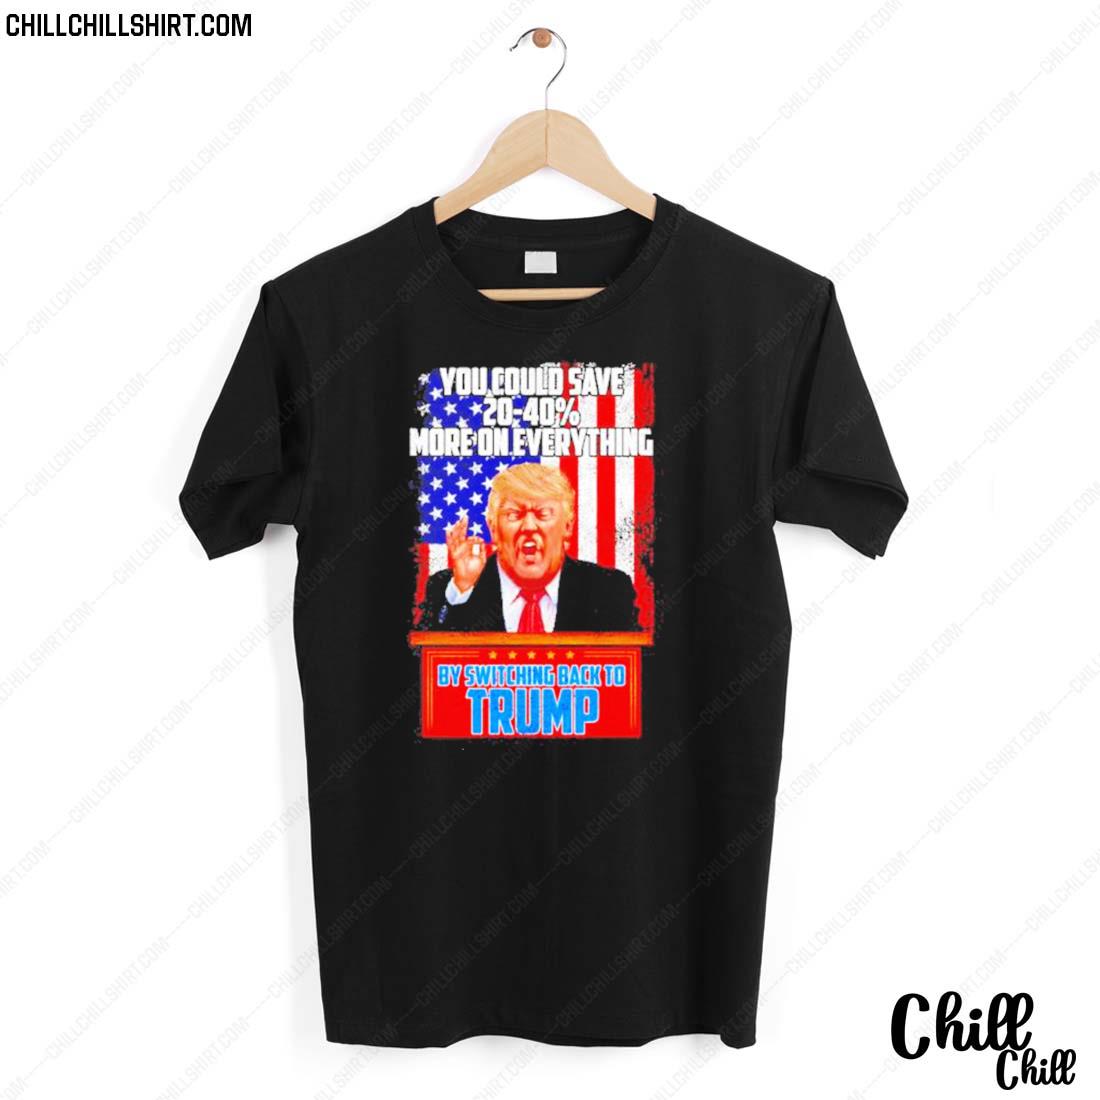 Nice you Could Save 20-40% More On Everything By Switching Back To Trump T-shirt